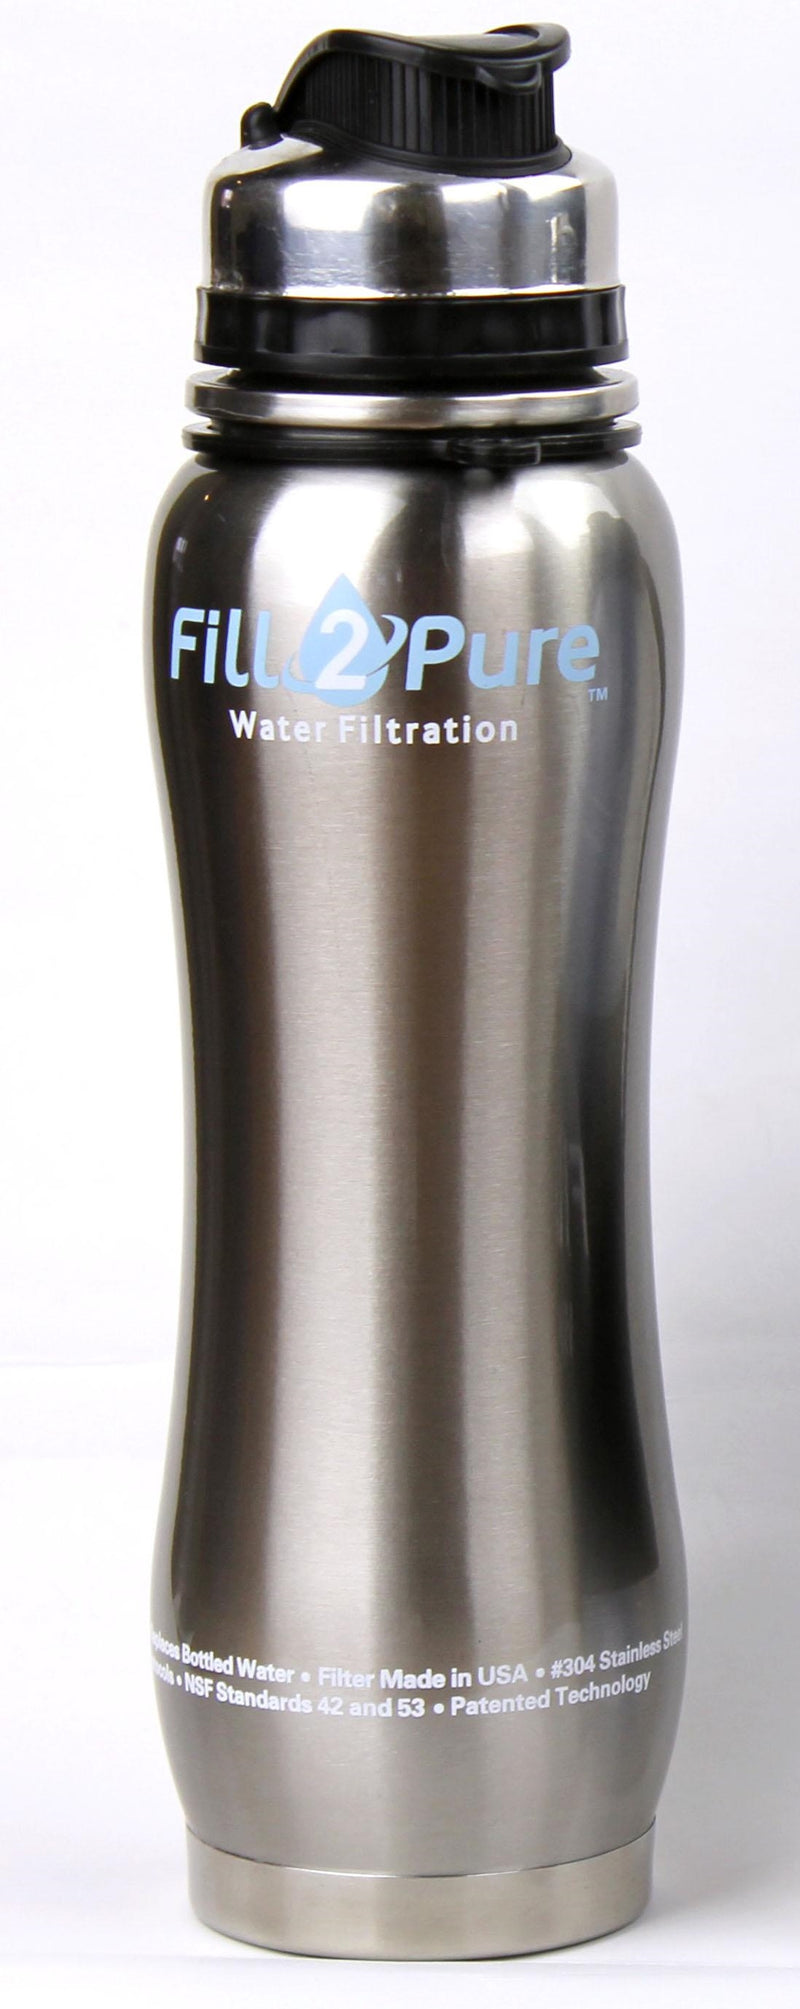 New Fill 2 pure water filtration systems stainless water bottle